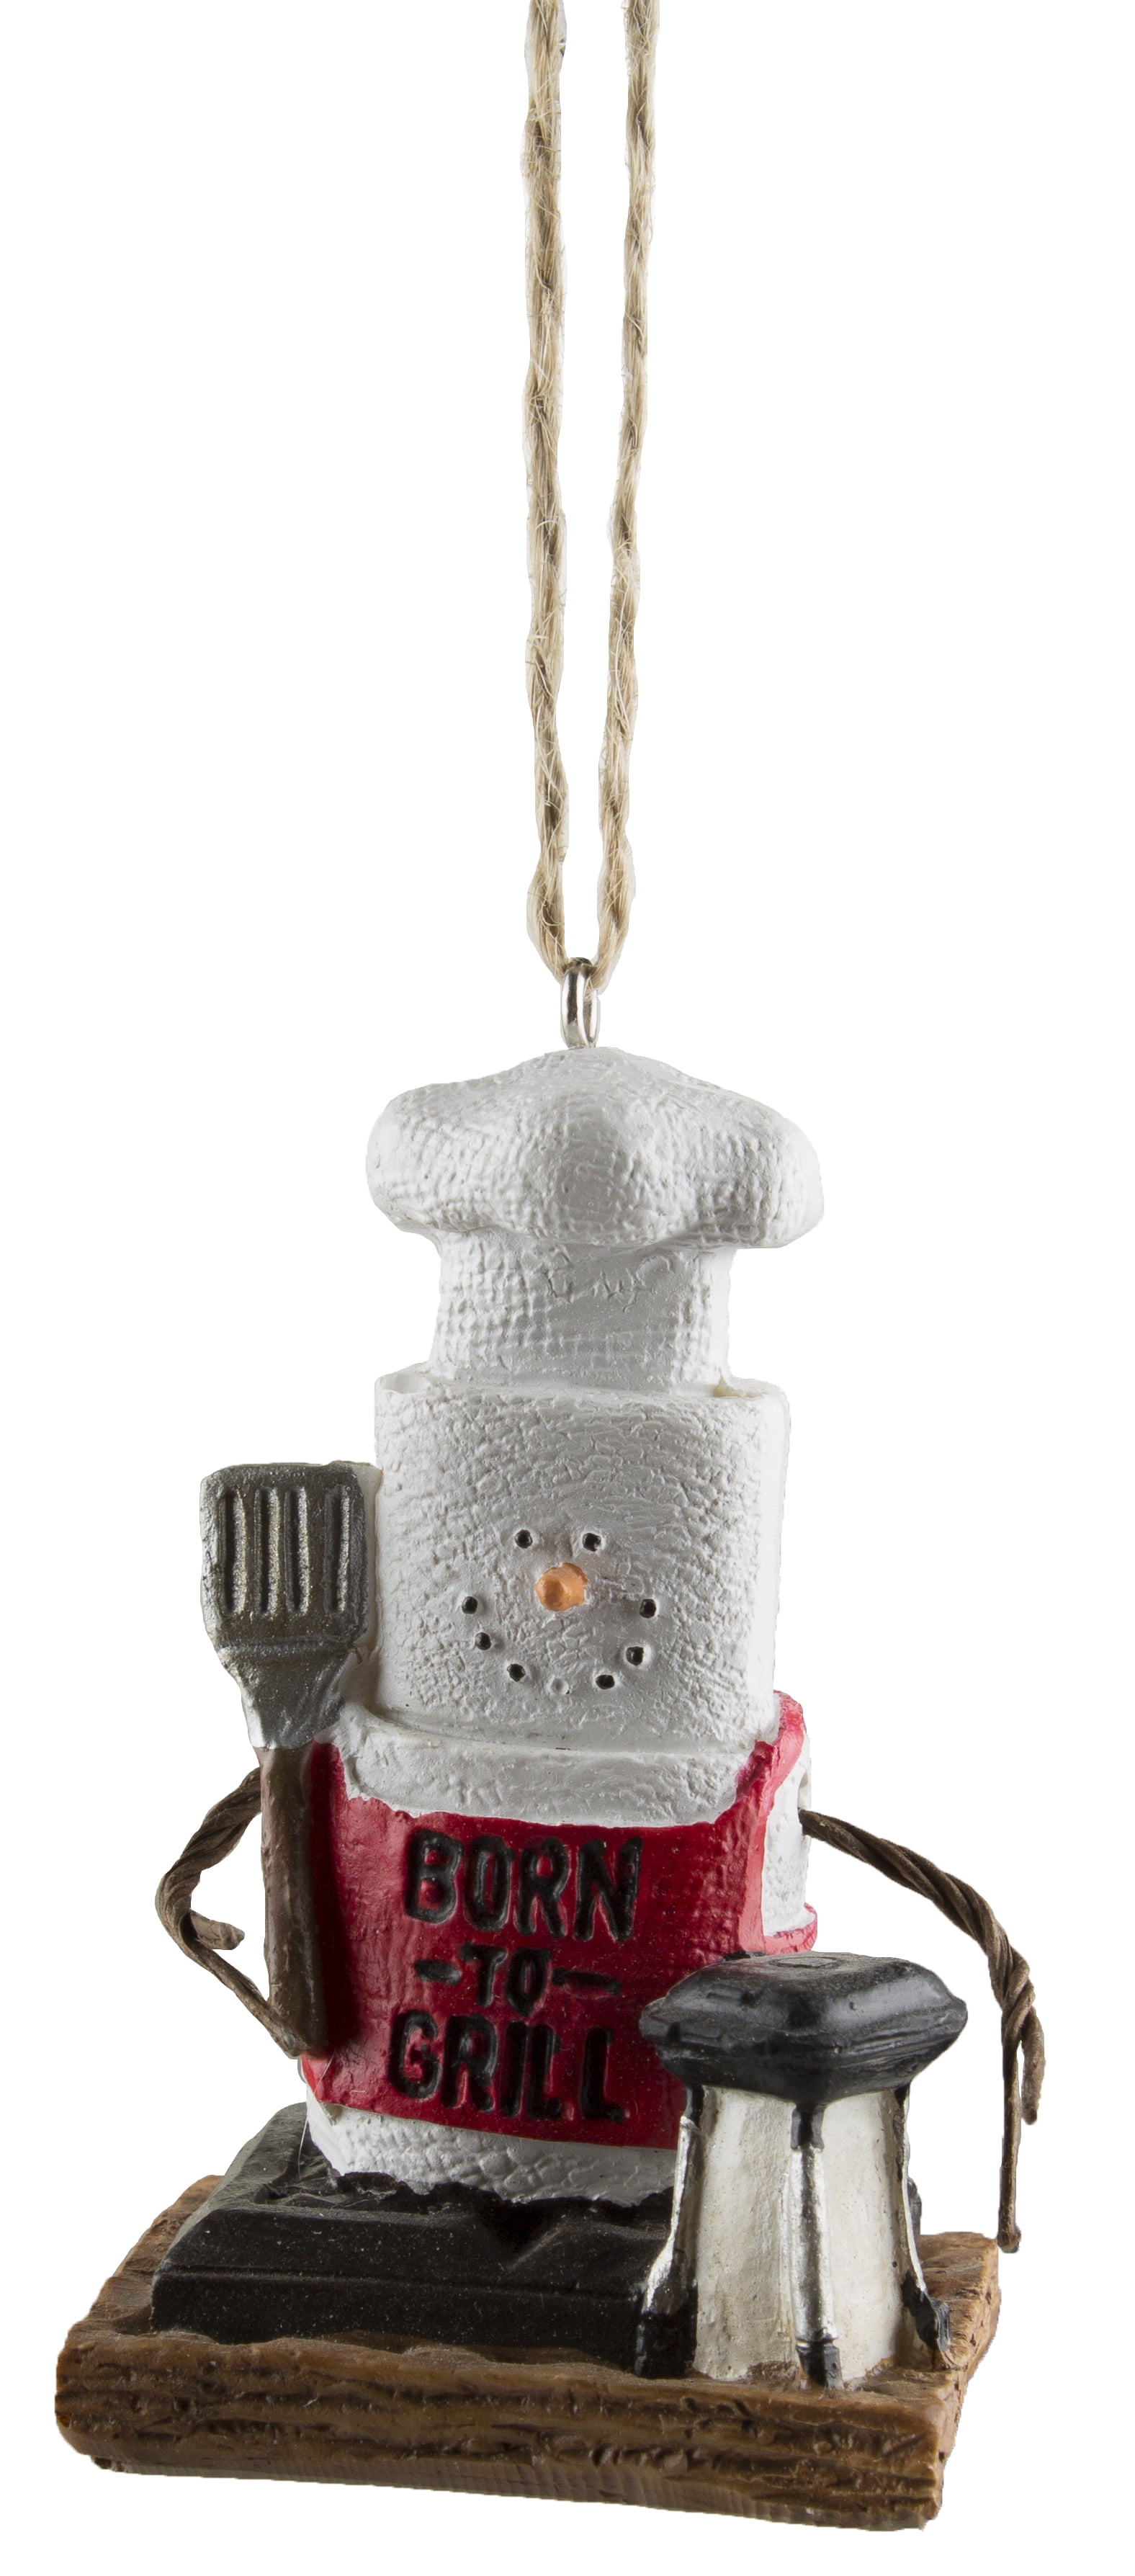 S'more with Summer Drink Ornament Free Ship USA 